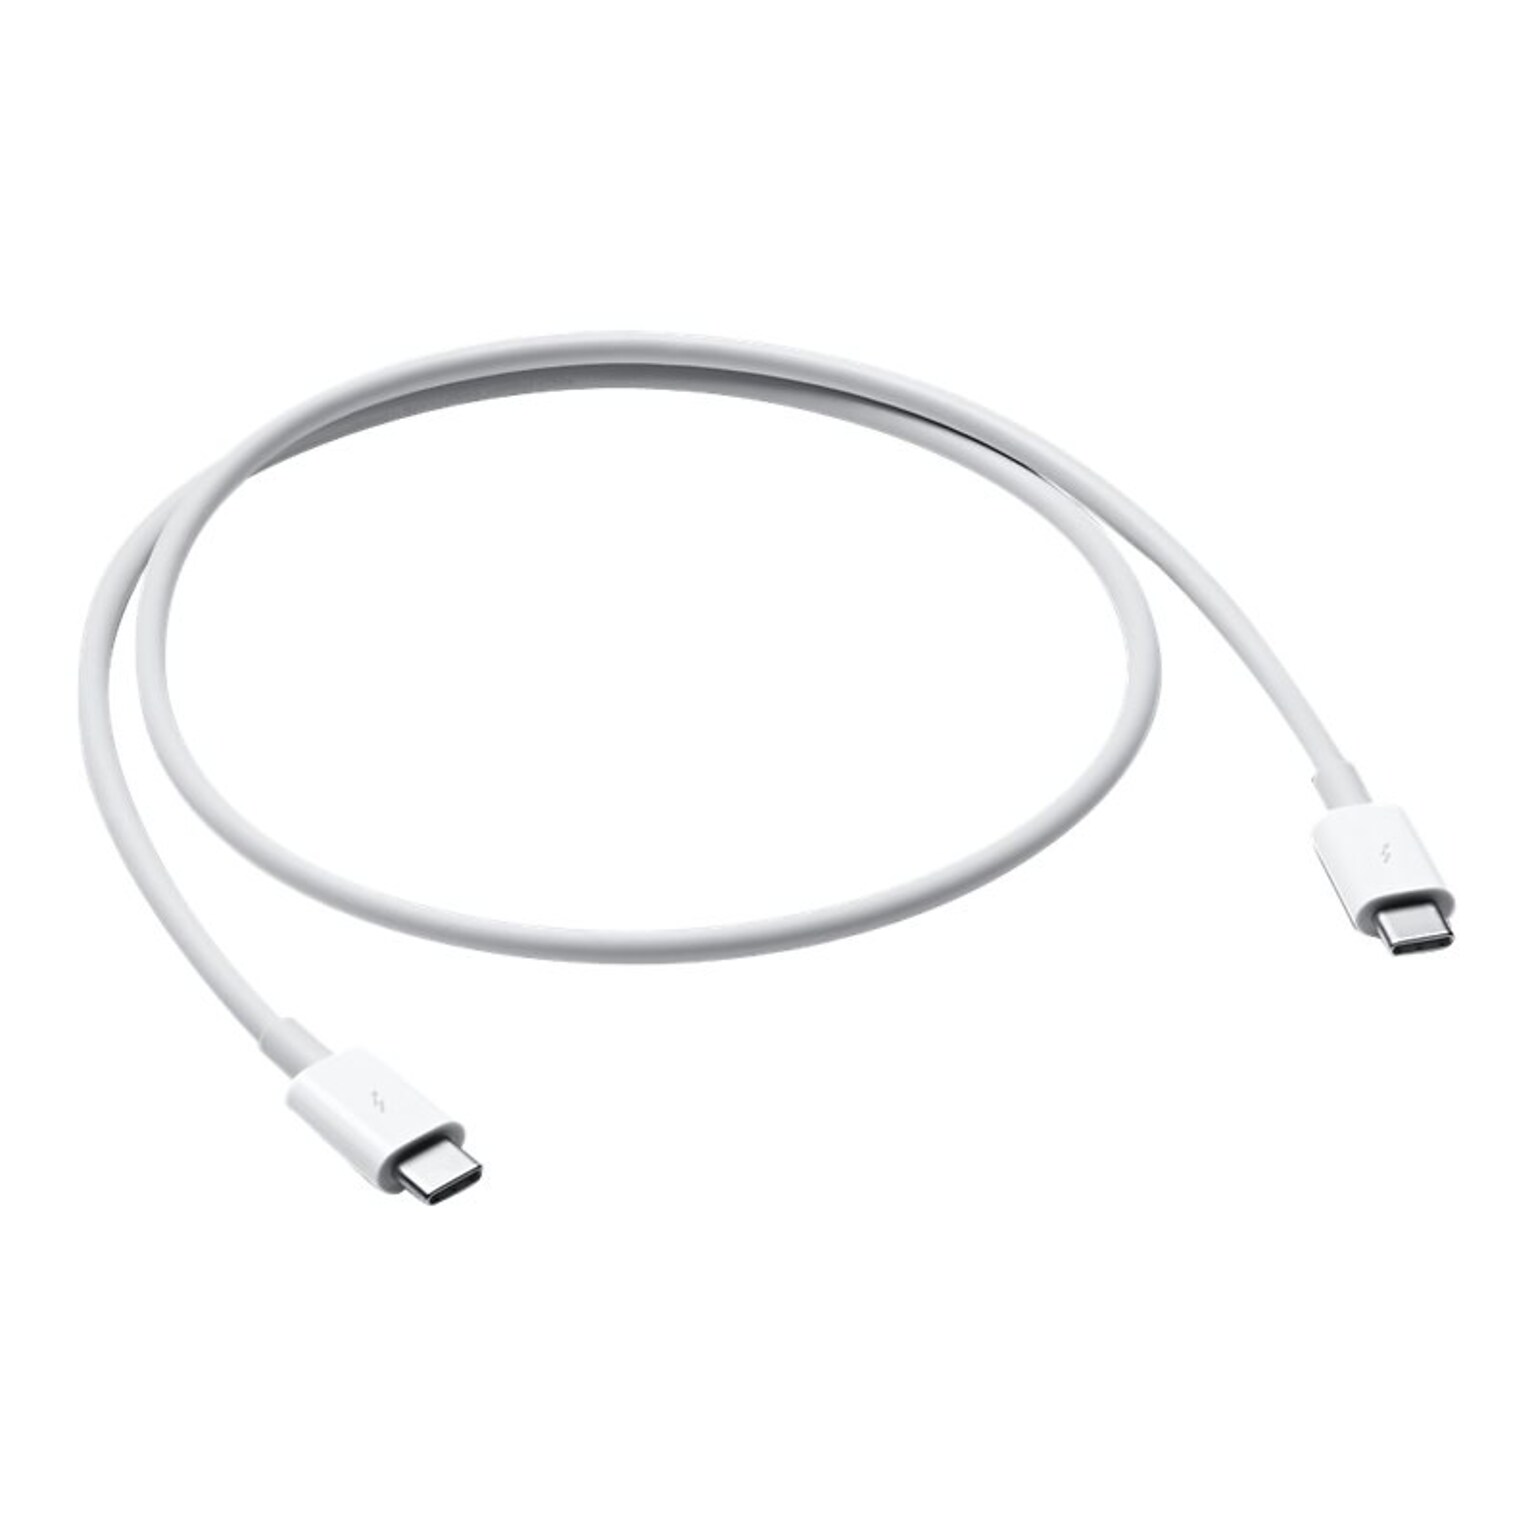 Apple 2.6 USB-C Thunderbolt 3 Cable, Male to Male, White (MQ4H2AM/A)